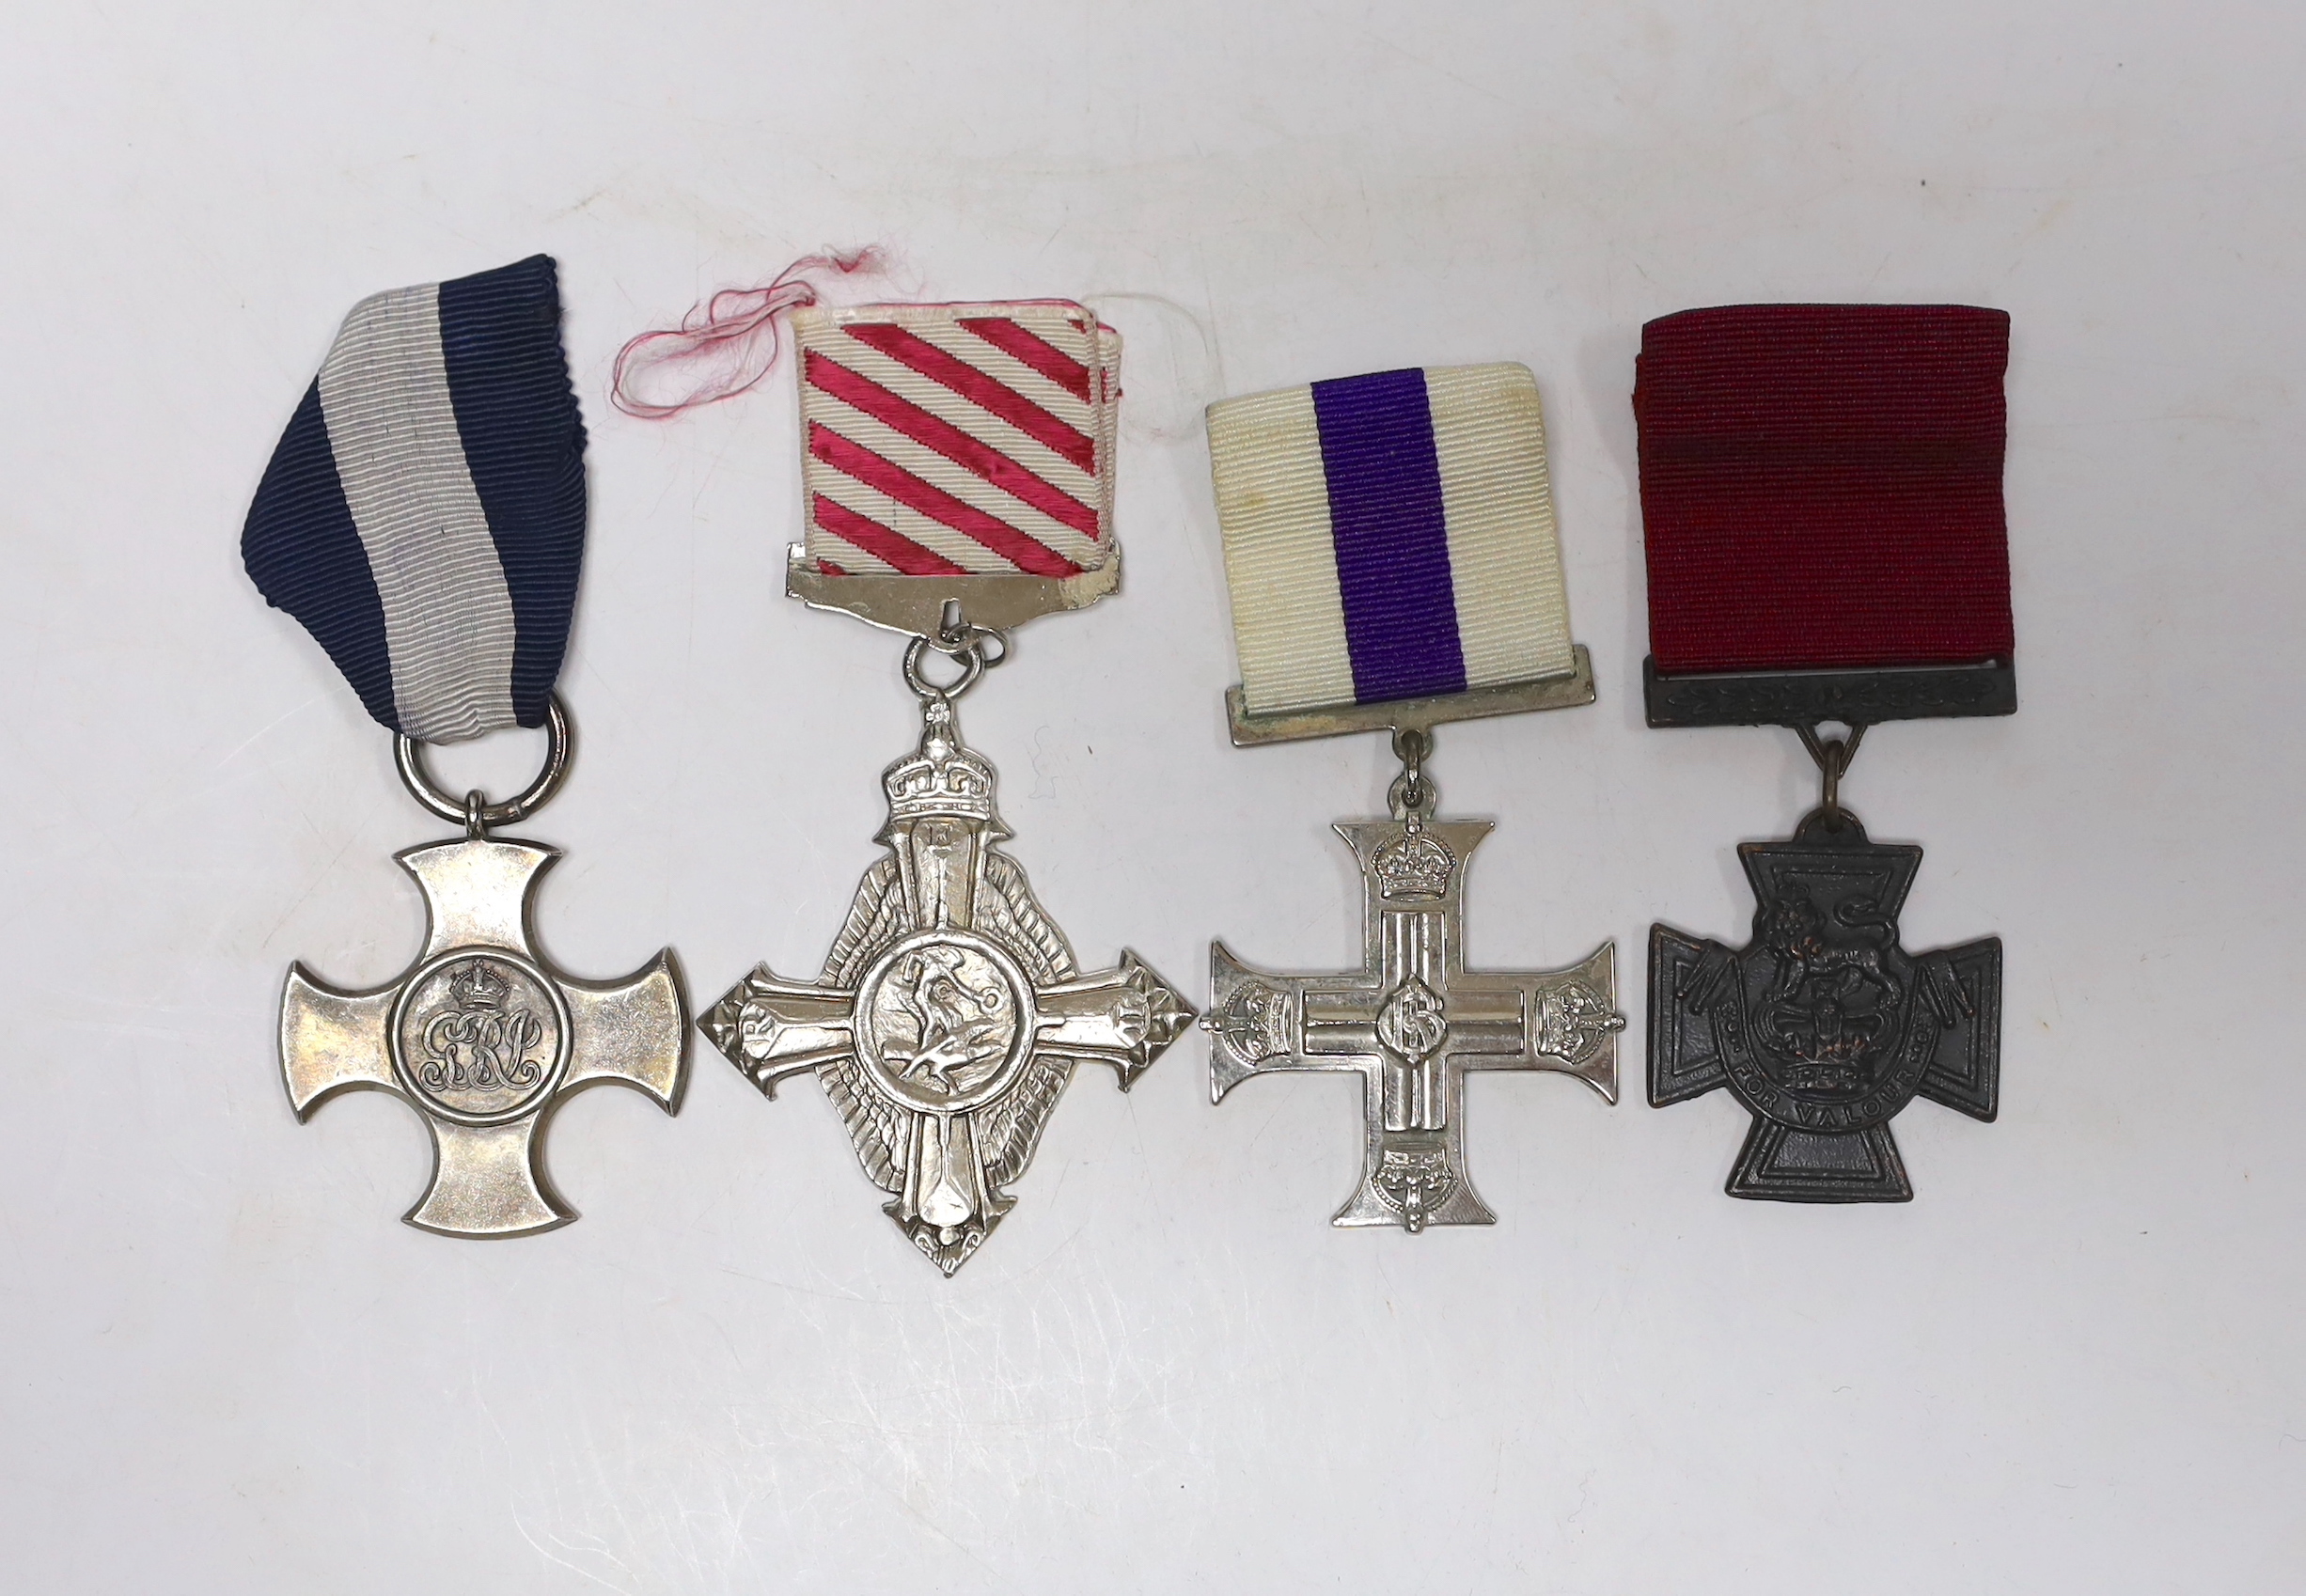 Four well produced replica medals. A Victoria Cross, a Distinguished Service Cross, a Military Cross and an Air Force Cross